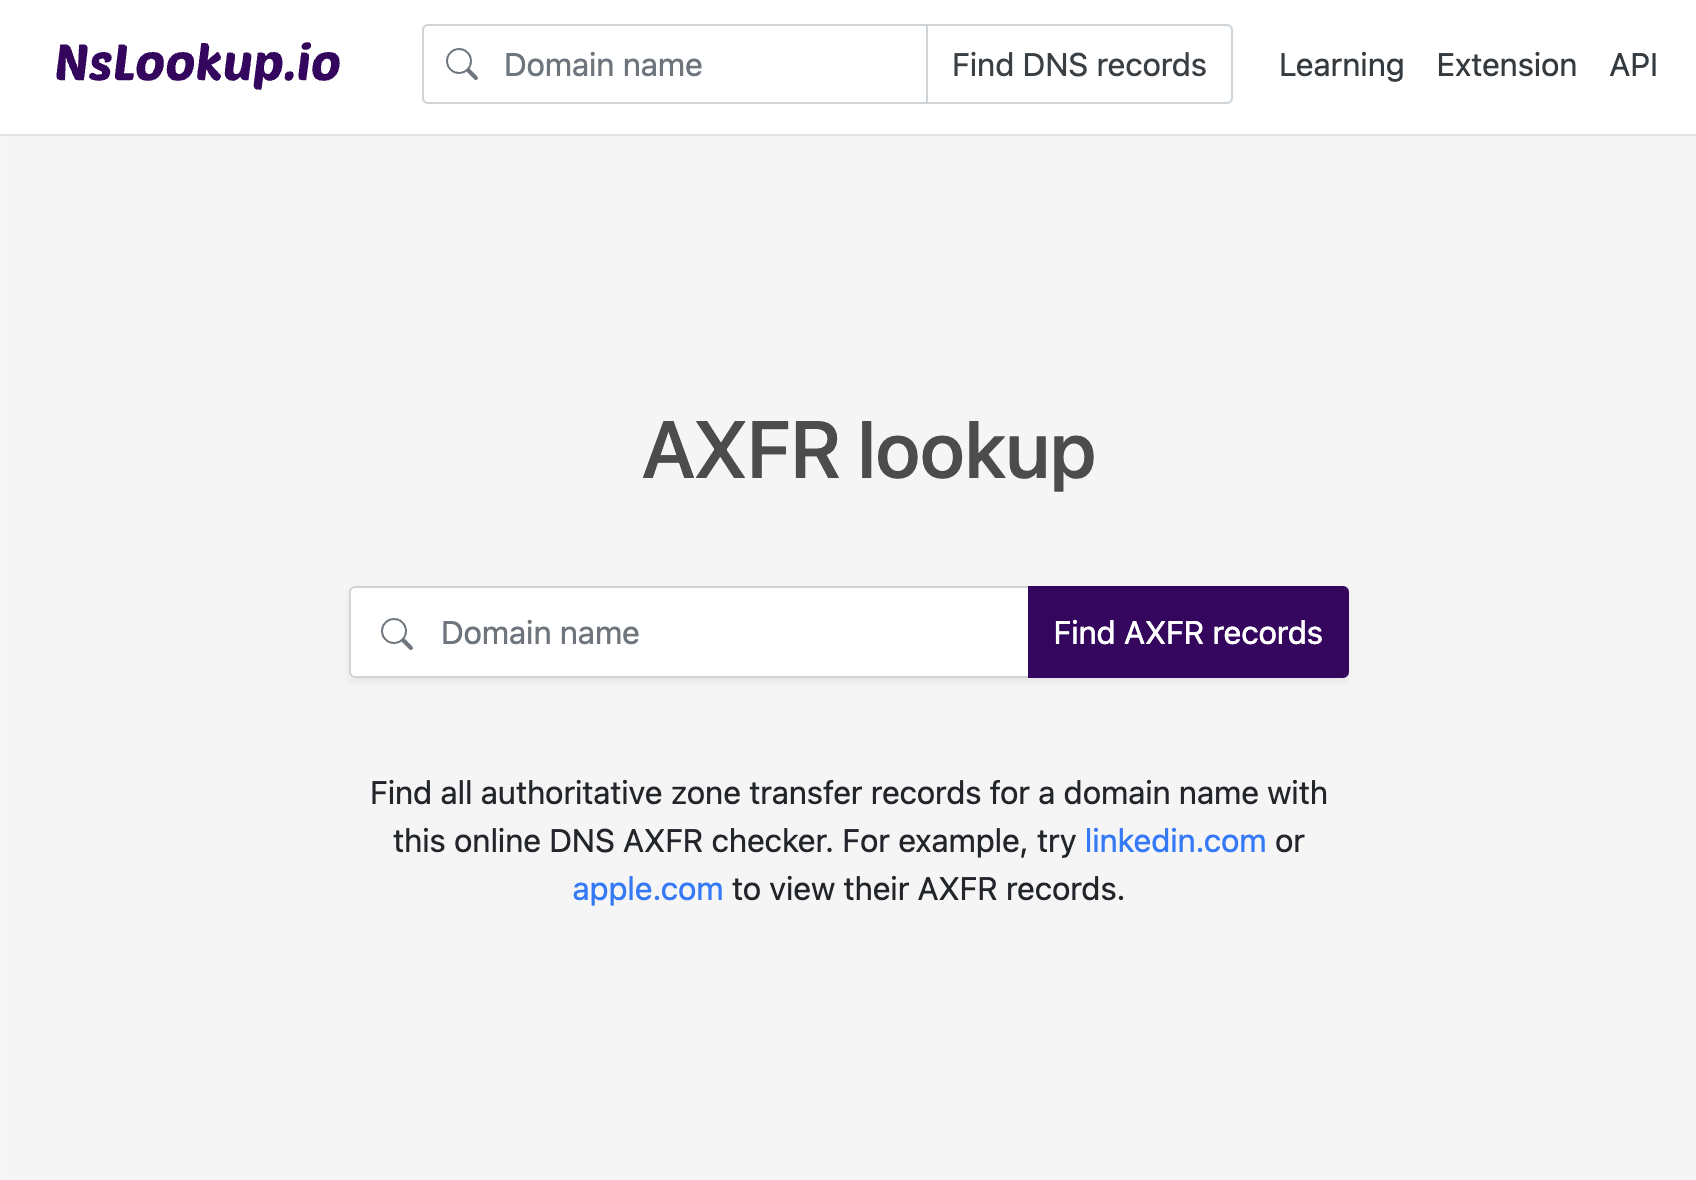 Open the AXFR lookup tool